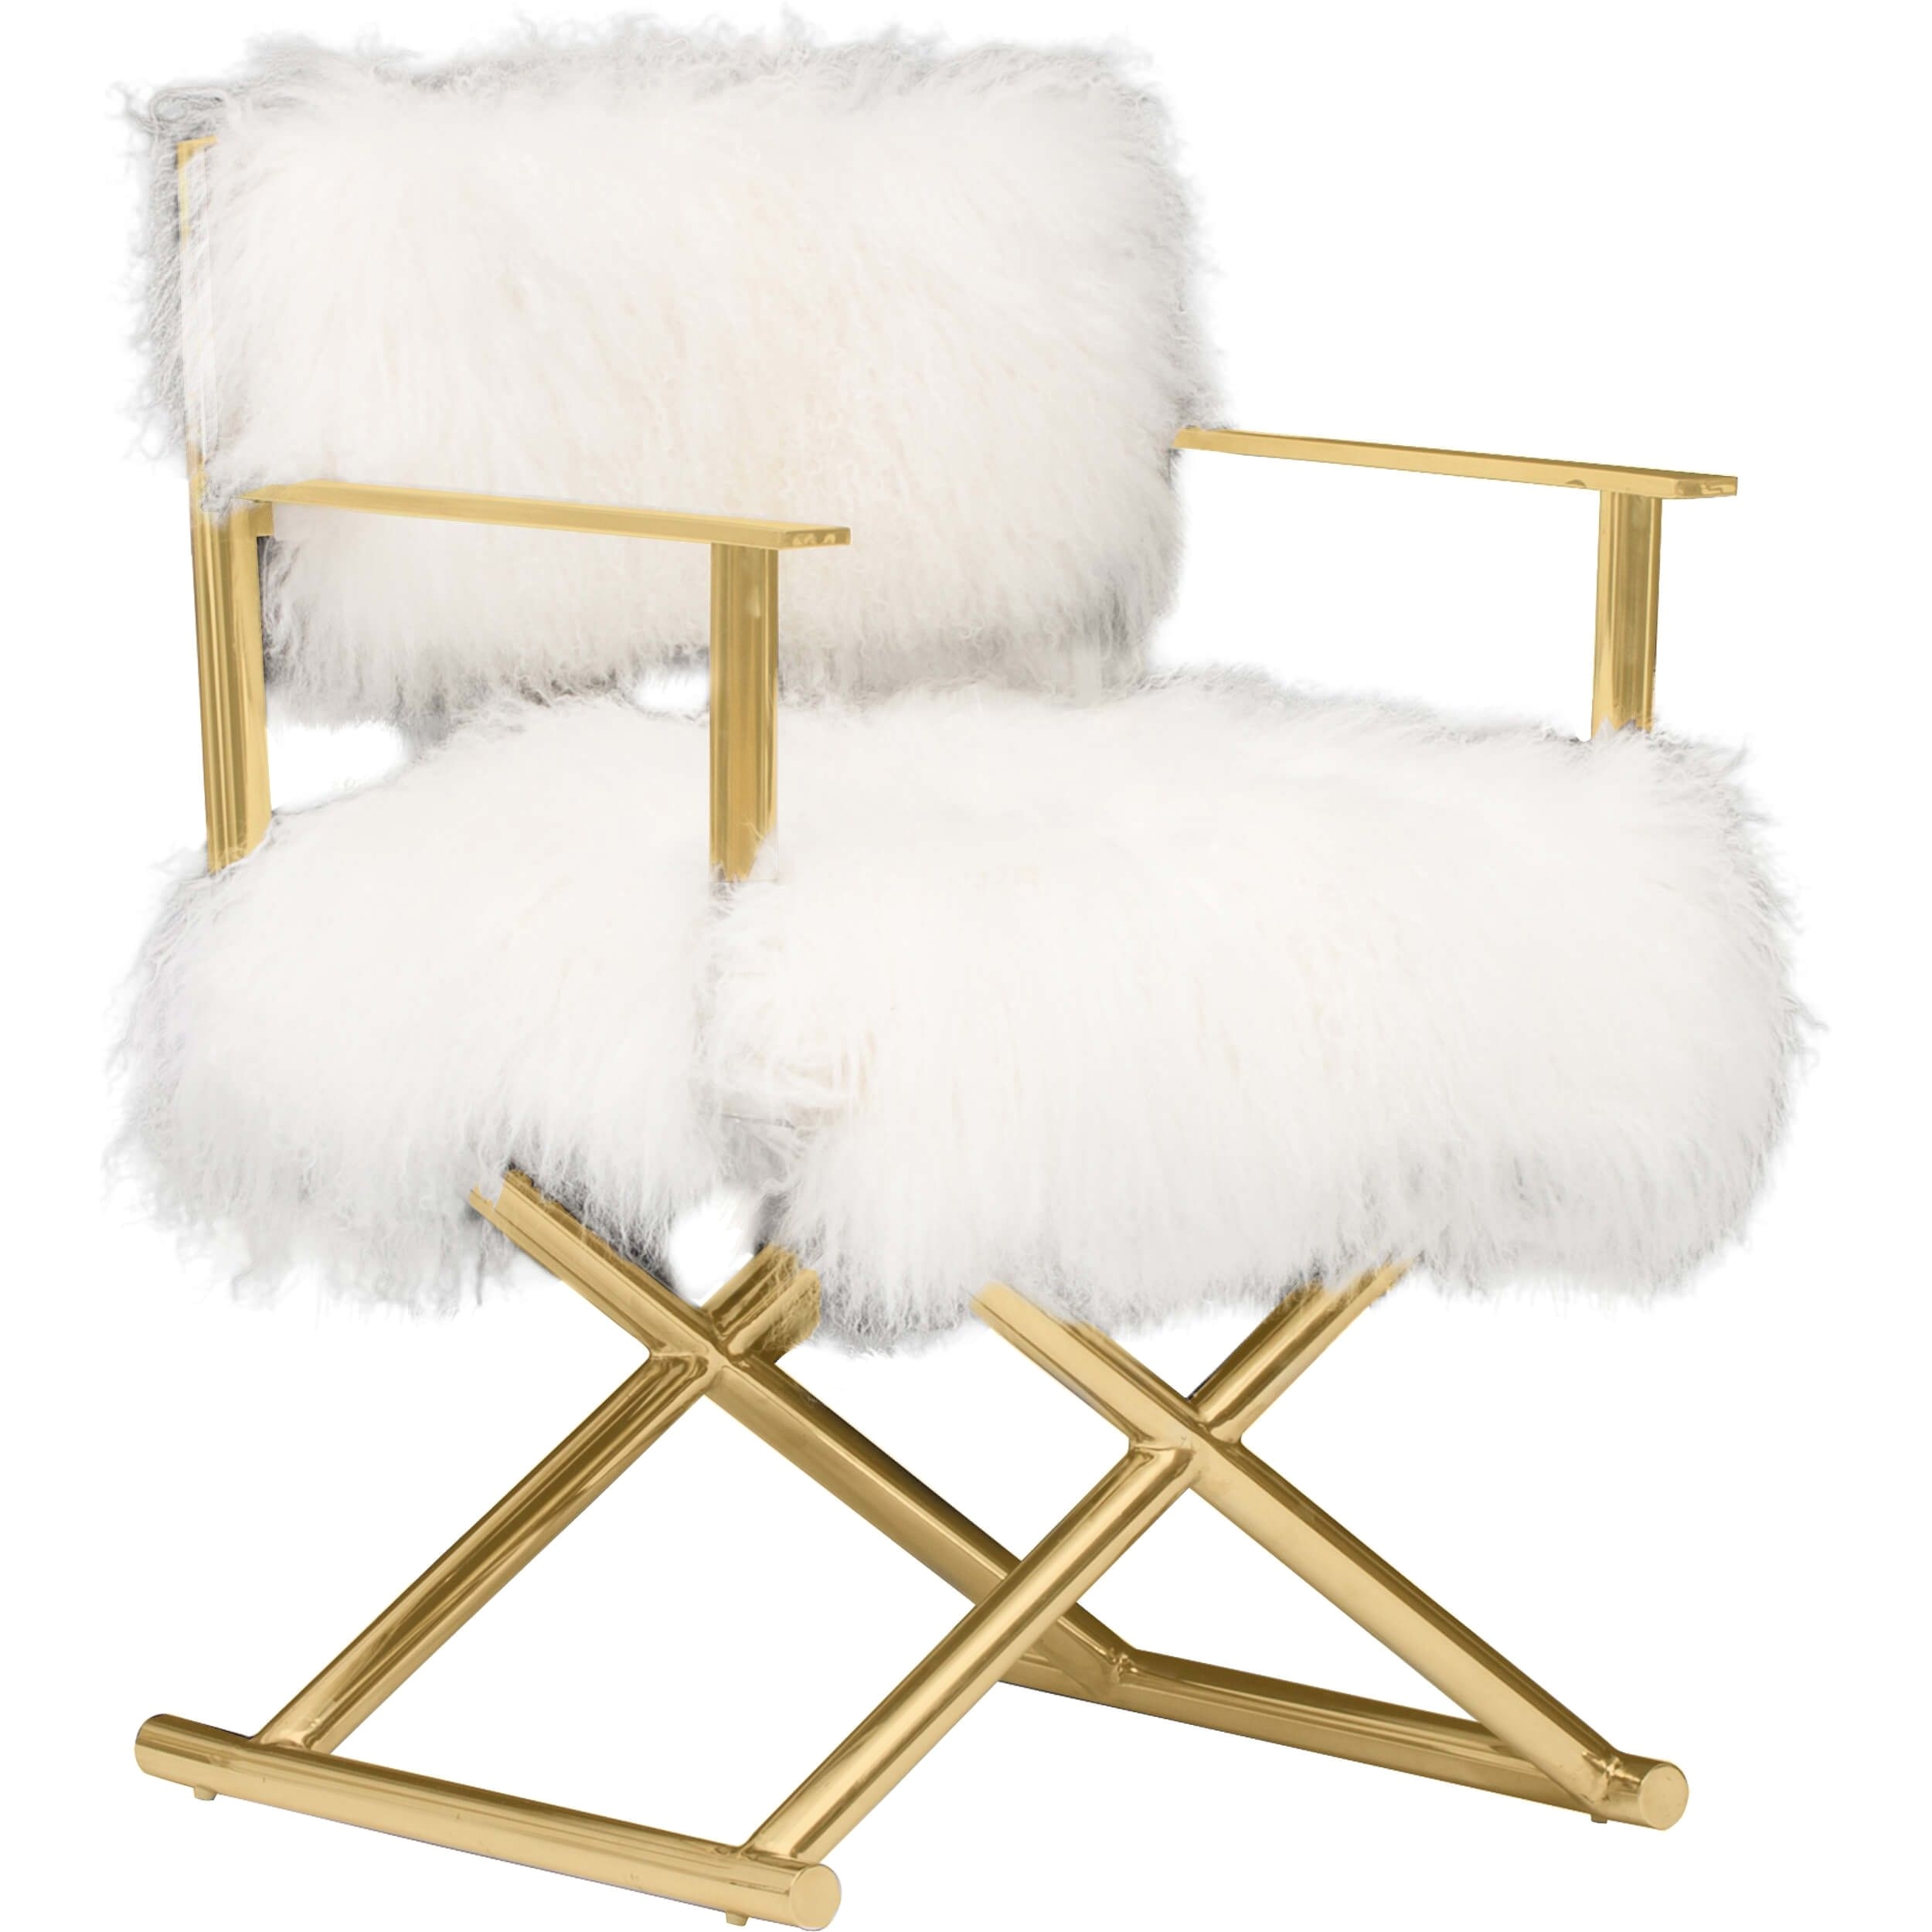 Fluffy Teenage Chairs Gigi Mongolian Fur Chair Gold Pinterest Dream Mansion Room and